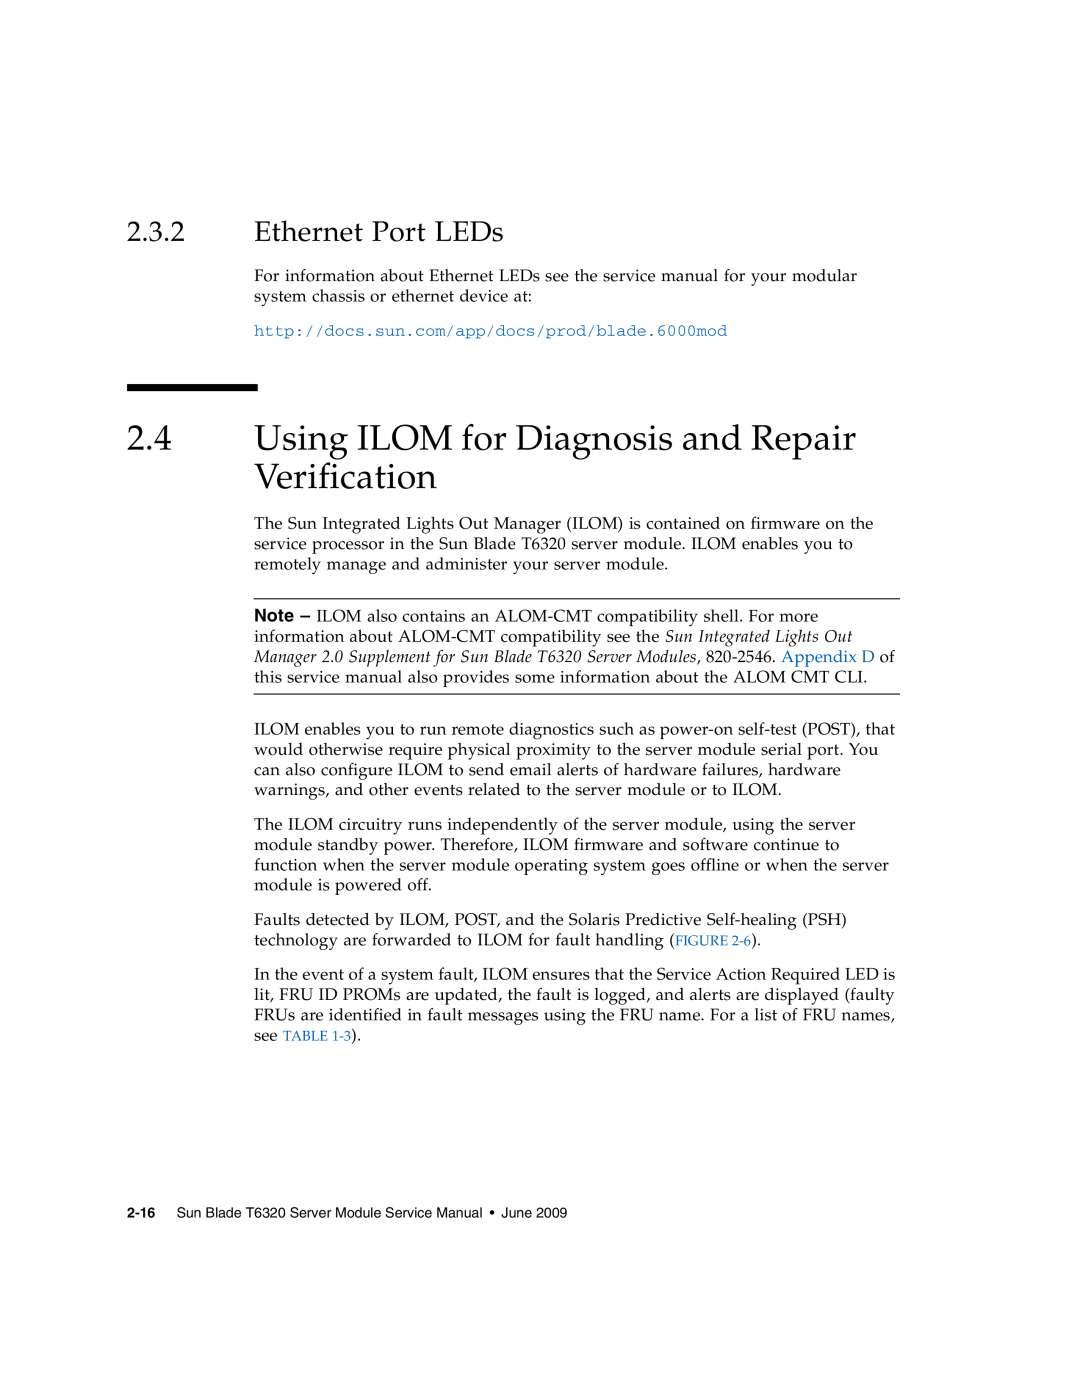 Sun Microsystems T6320 service manual Using ILOM for Diagnosis and Repair Verification, Ethernet Port LEDs 